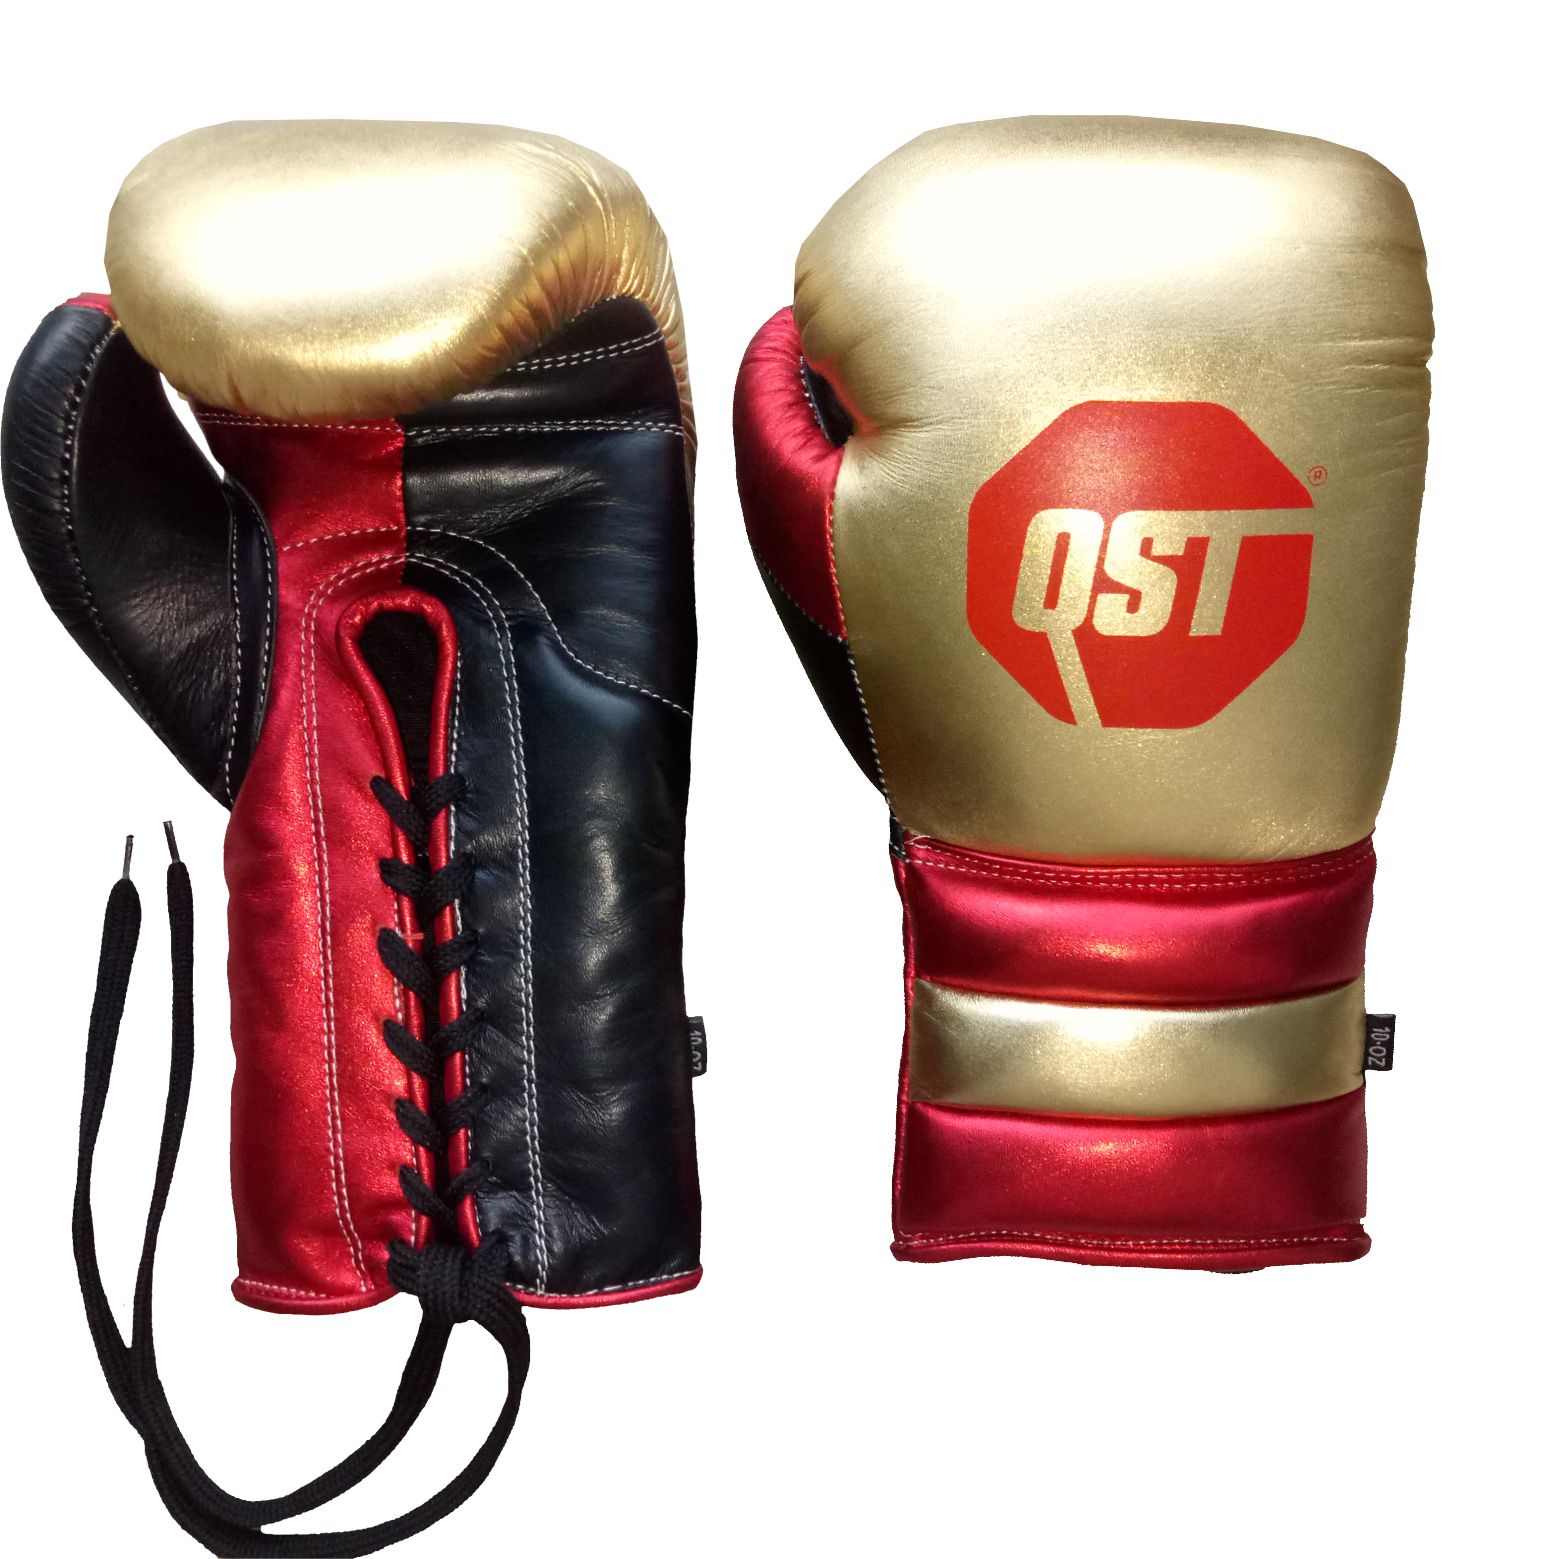 Lace up Boxing Gloves - PRG-3255